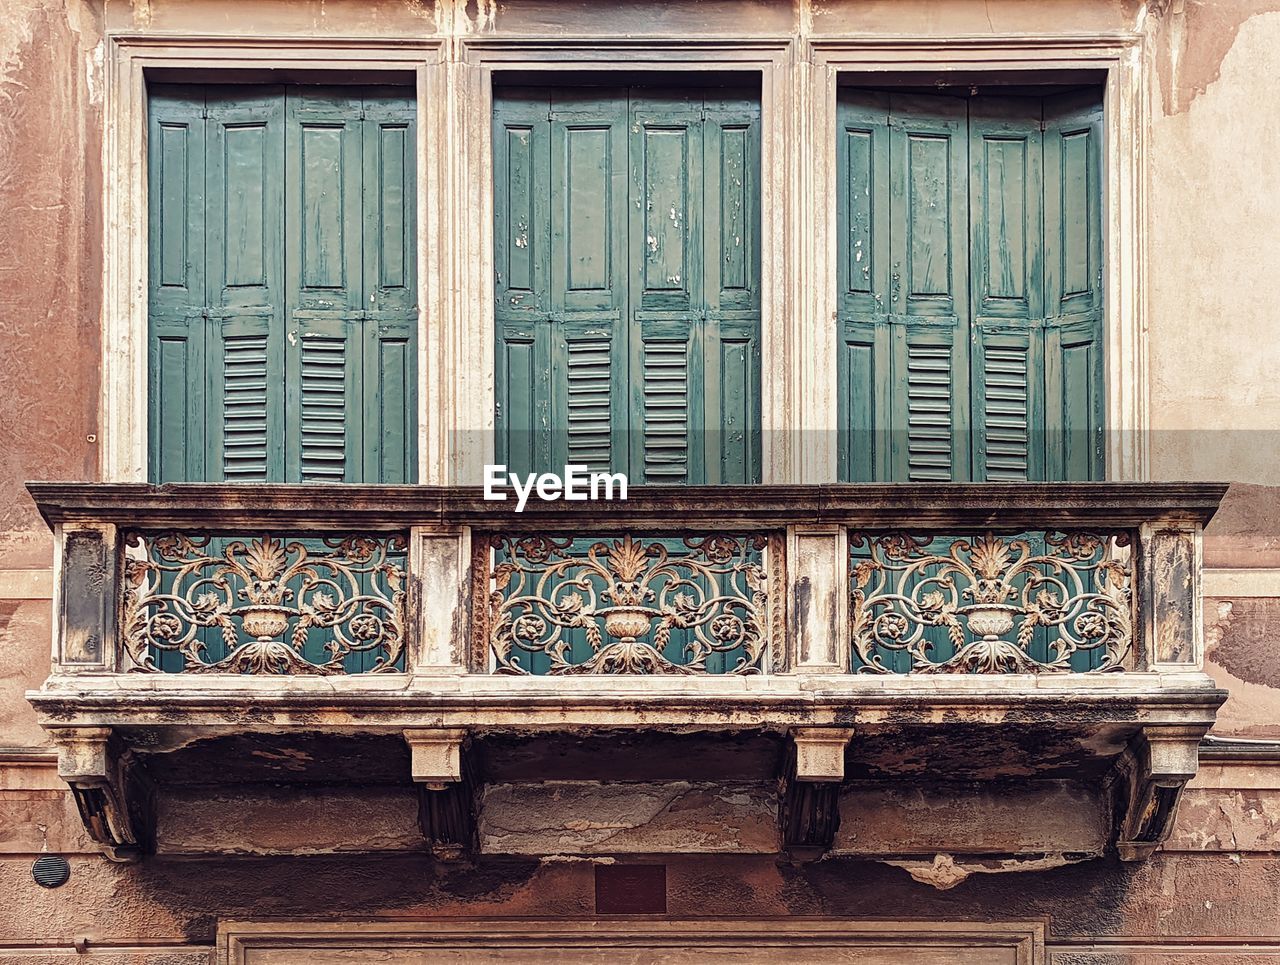 architecture, building exterior, built structure, window, wood, iron, no people, building, day, furniture, closed, house, residential district, outdoors, door, old, entrance, wall - building feature, pattern, city, facade, history, balcony